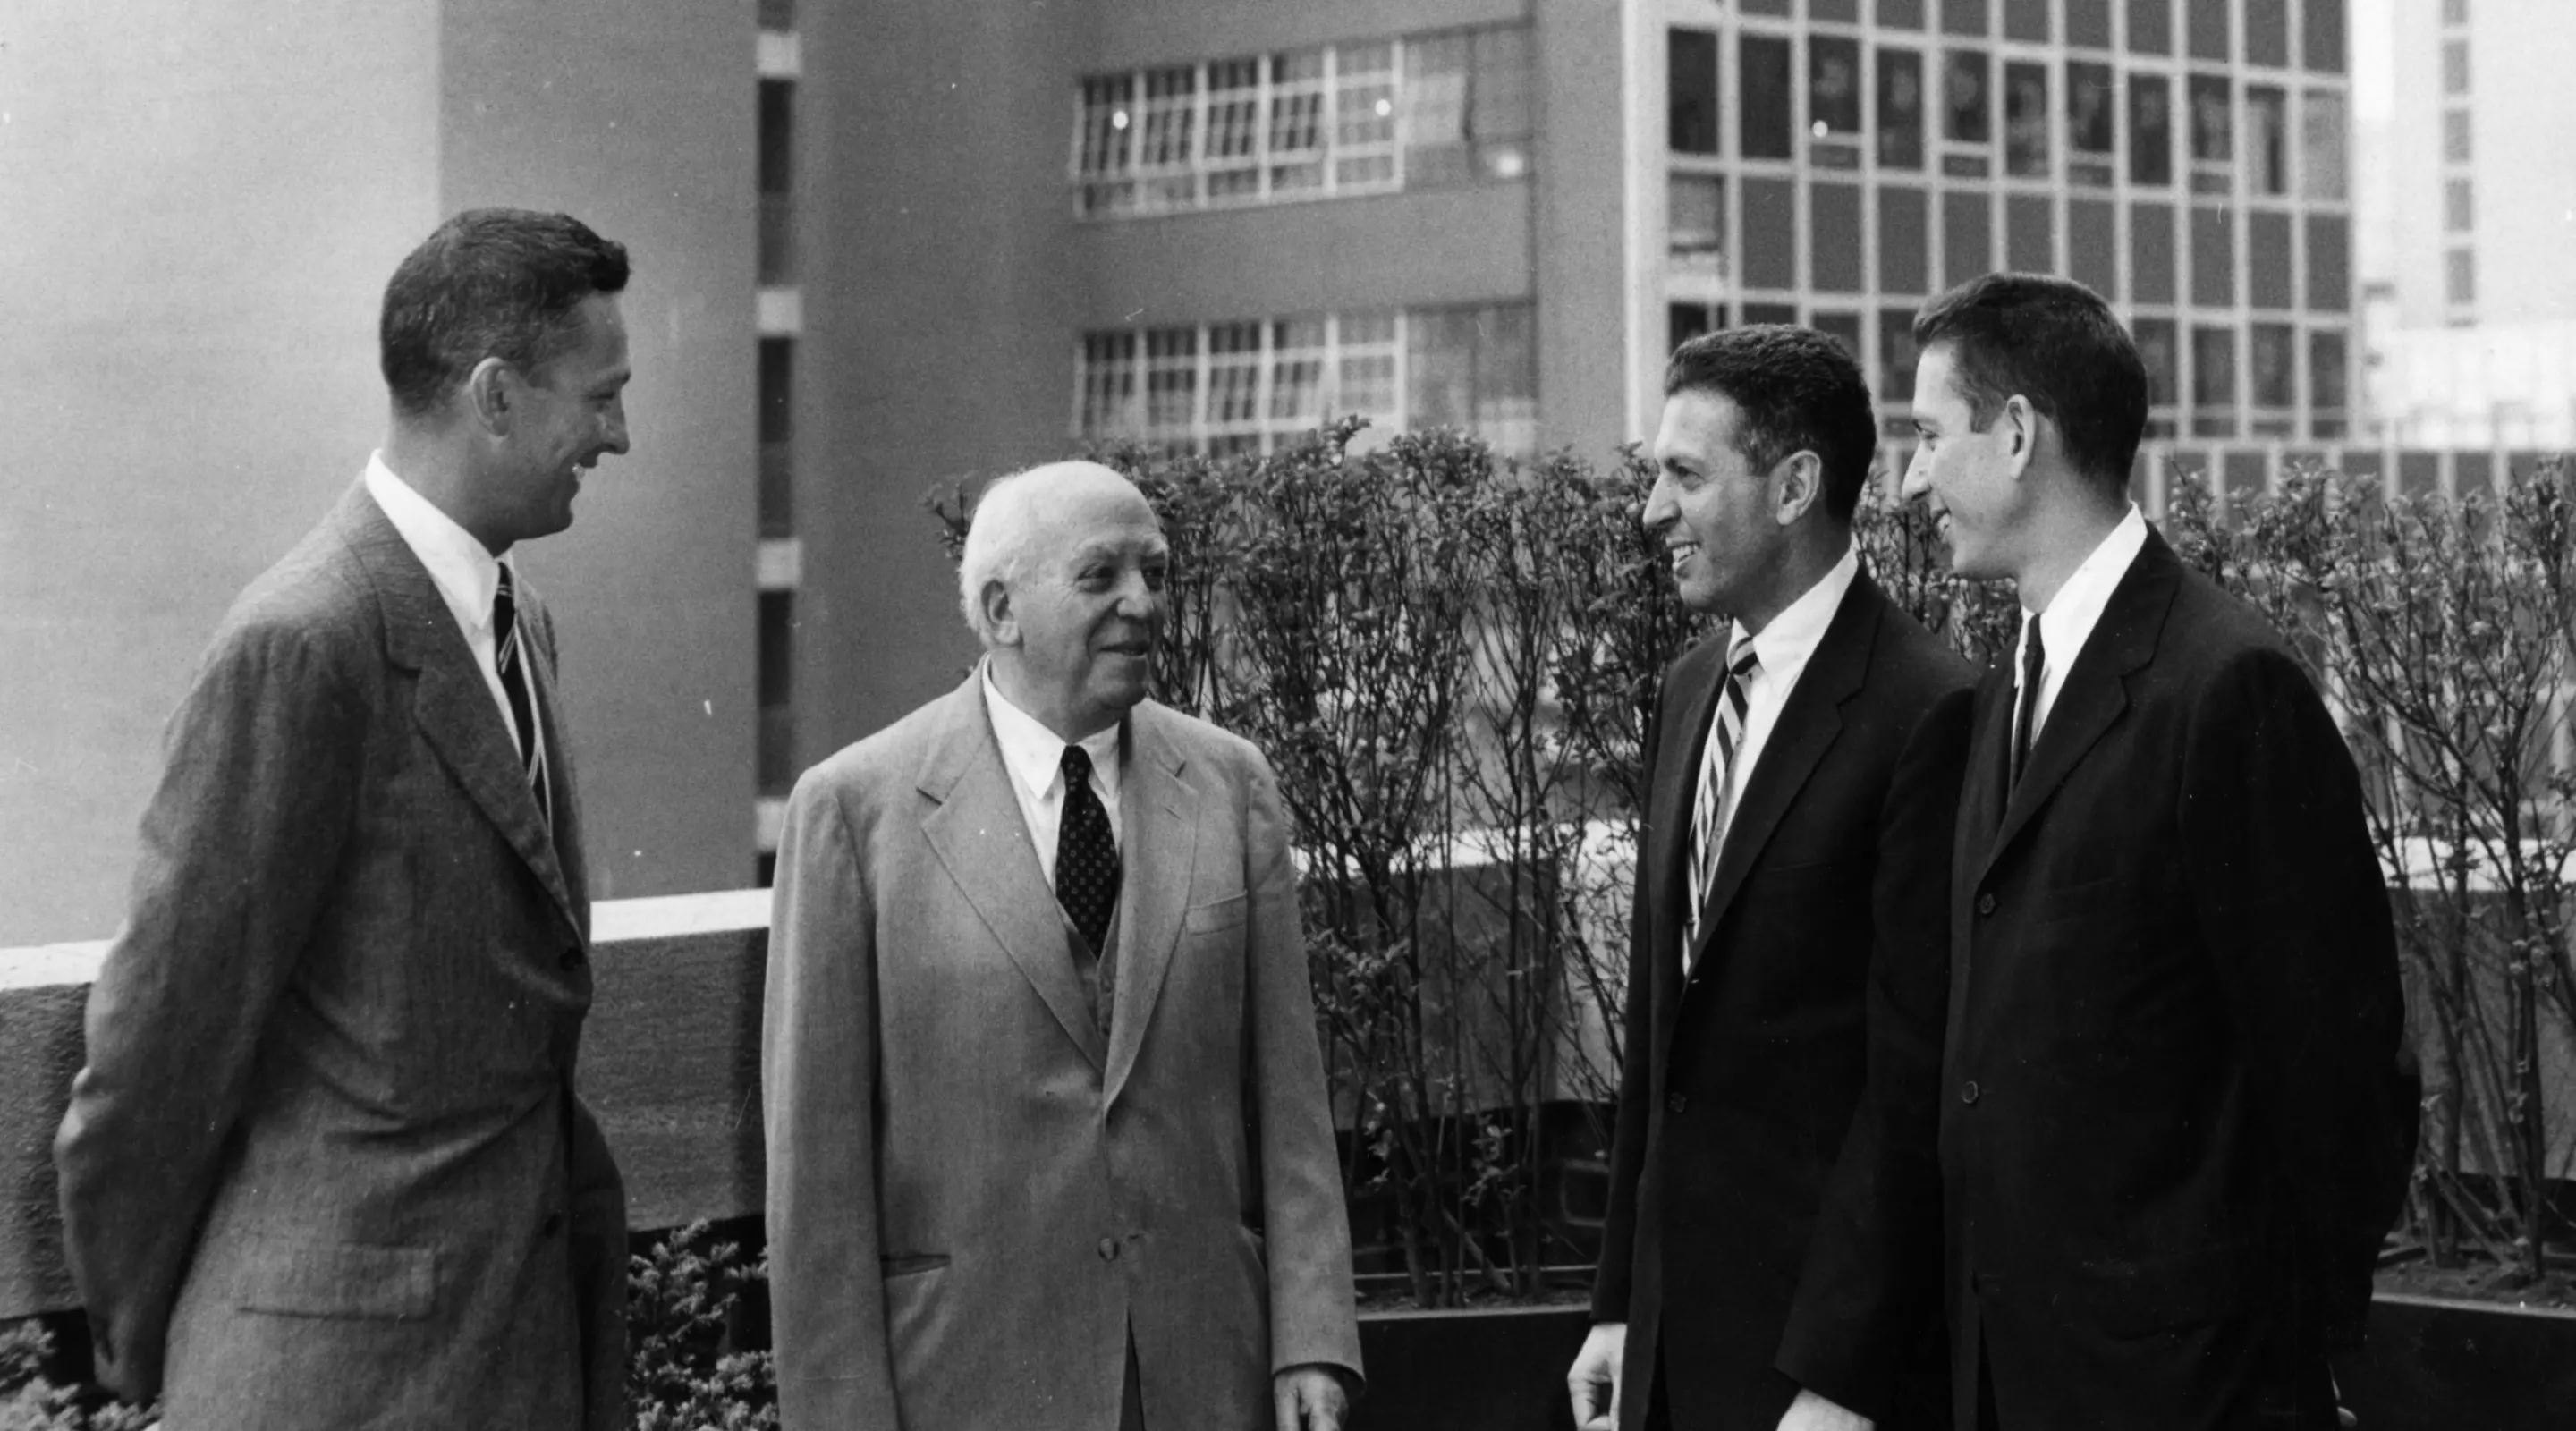 Black and white photo of four men conversing on a rooftop, city buildings in the background.